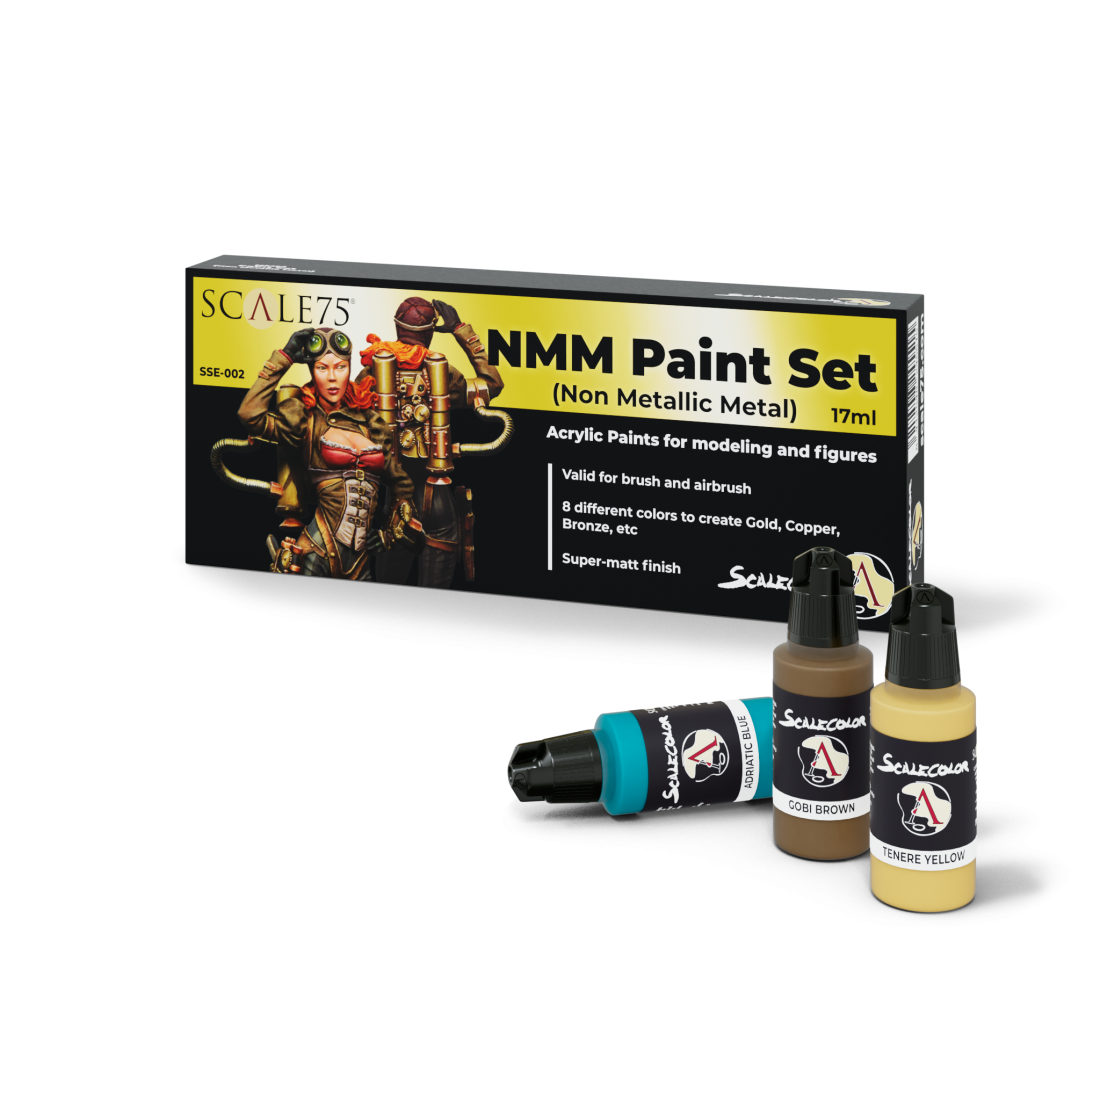 Scale 75 Scalecolor NMM Gold and Copper Paint Set